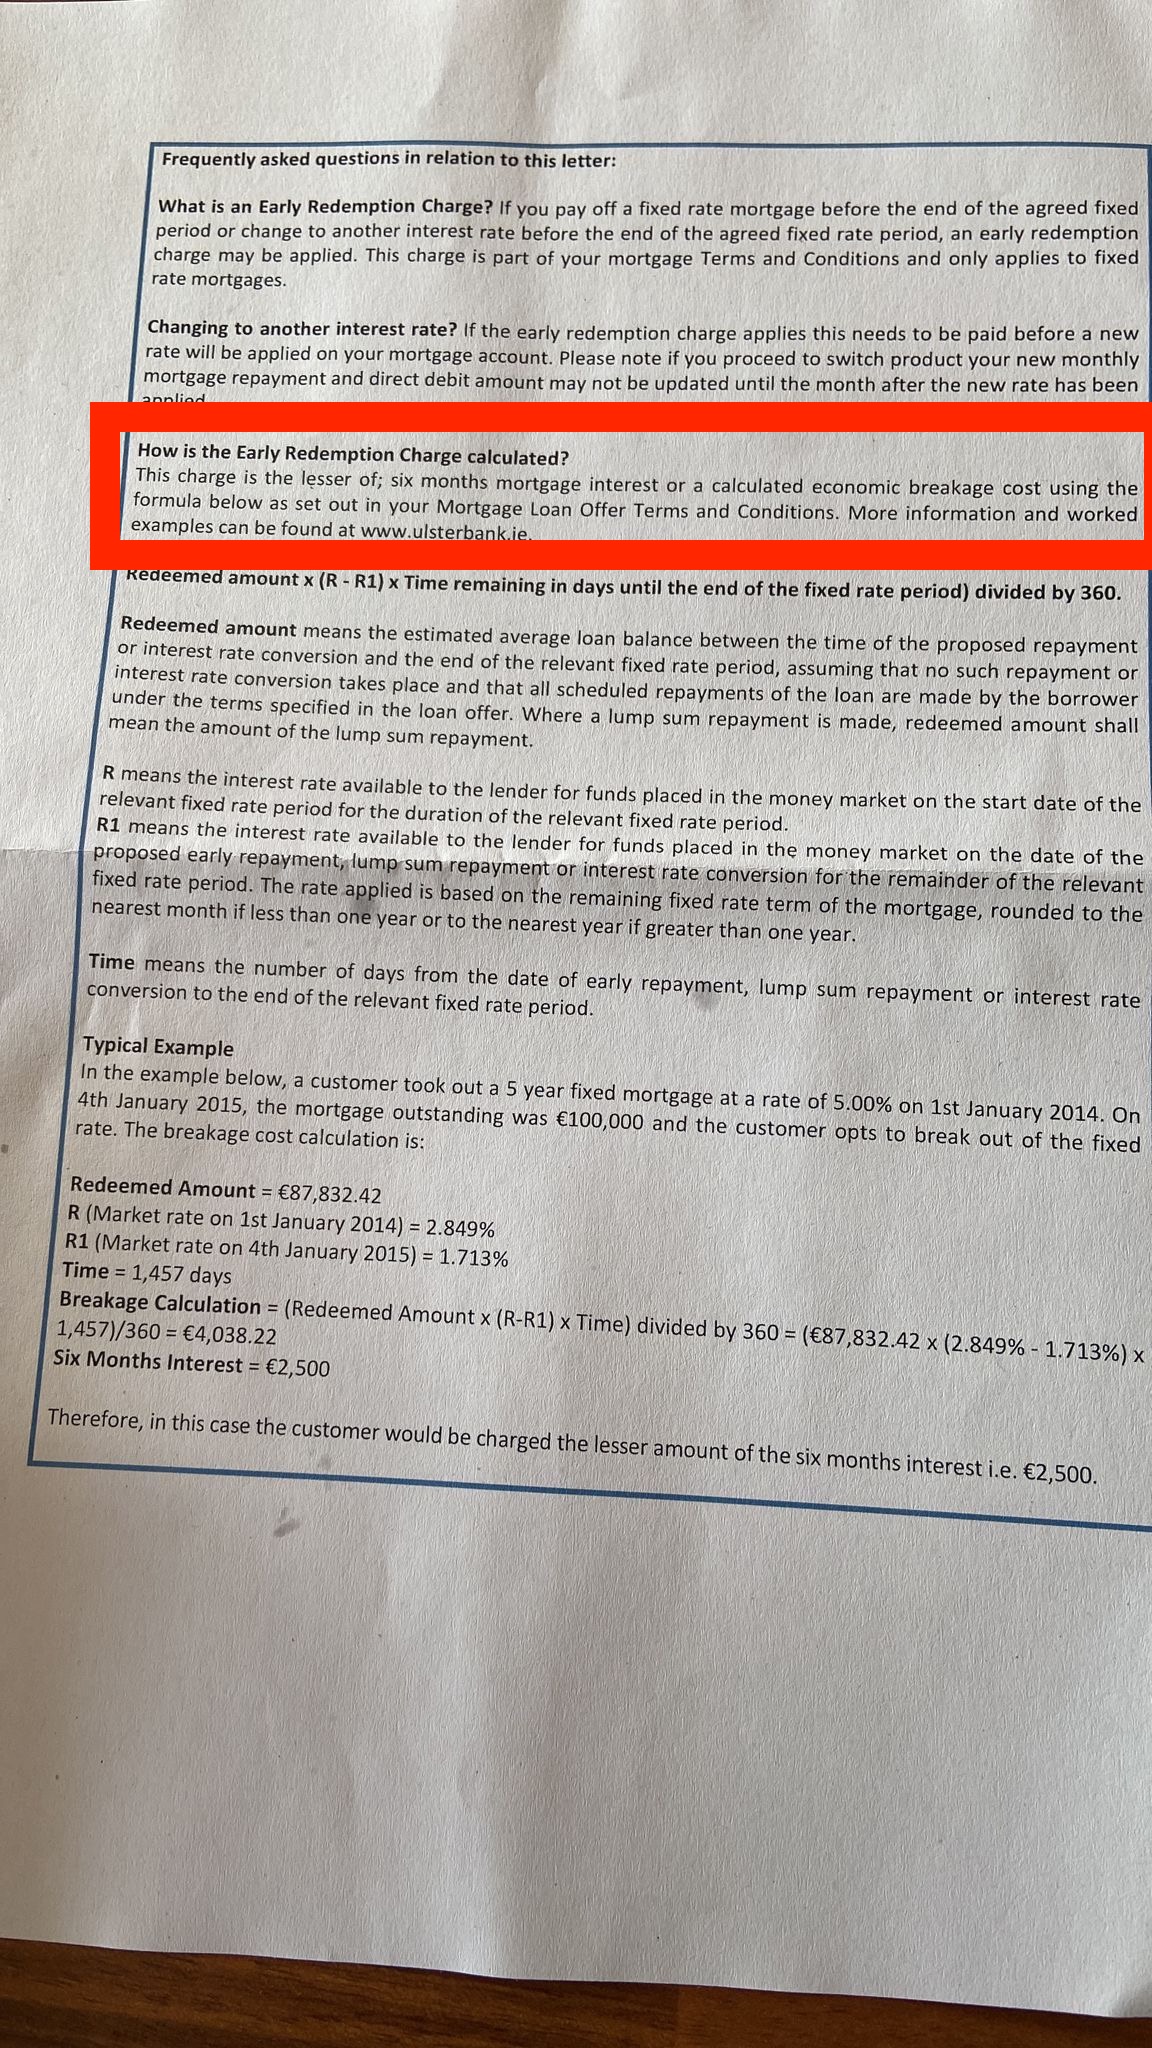 Letter from Ulster Bank showing their break fee calculation